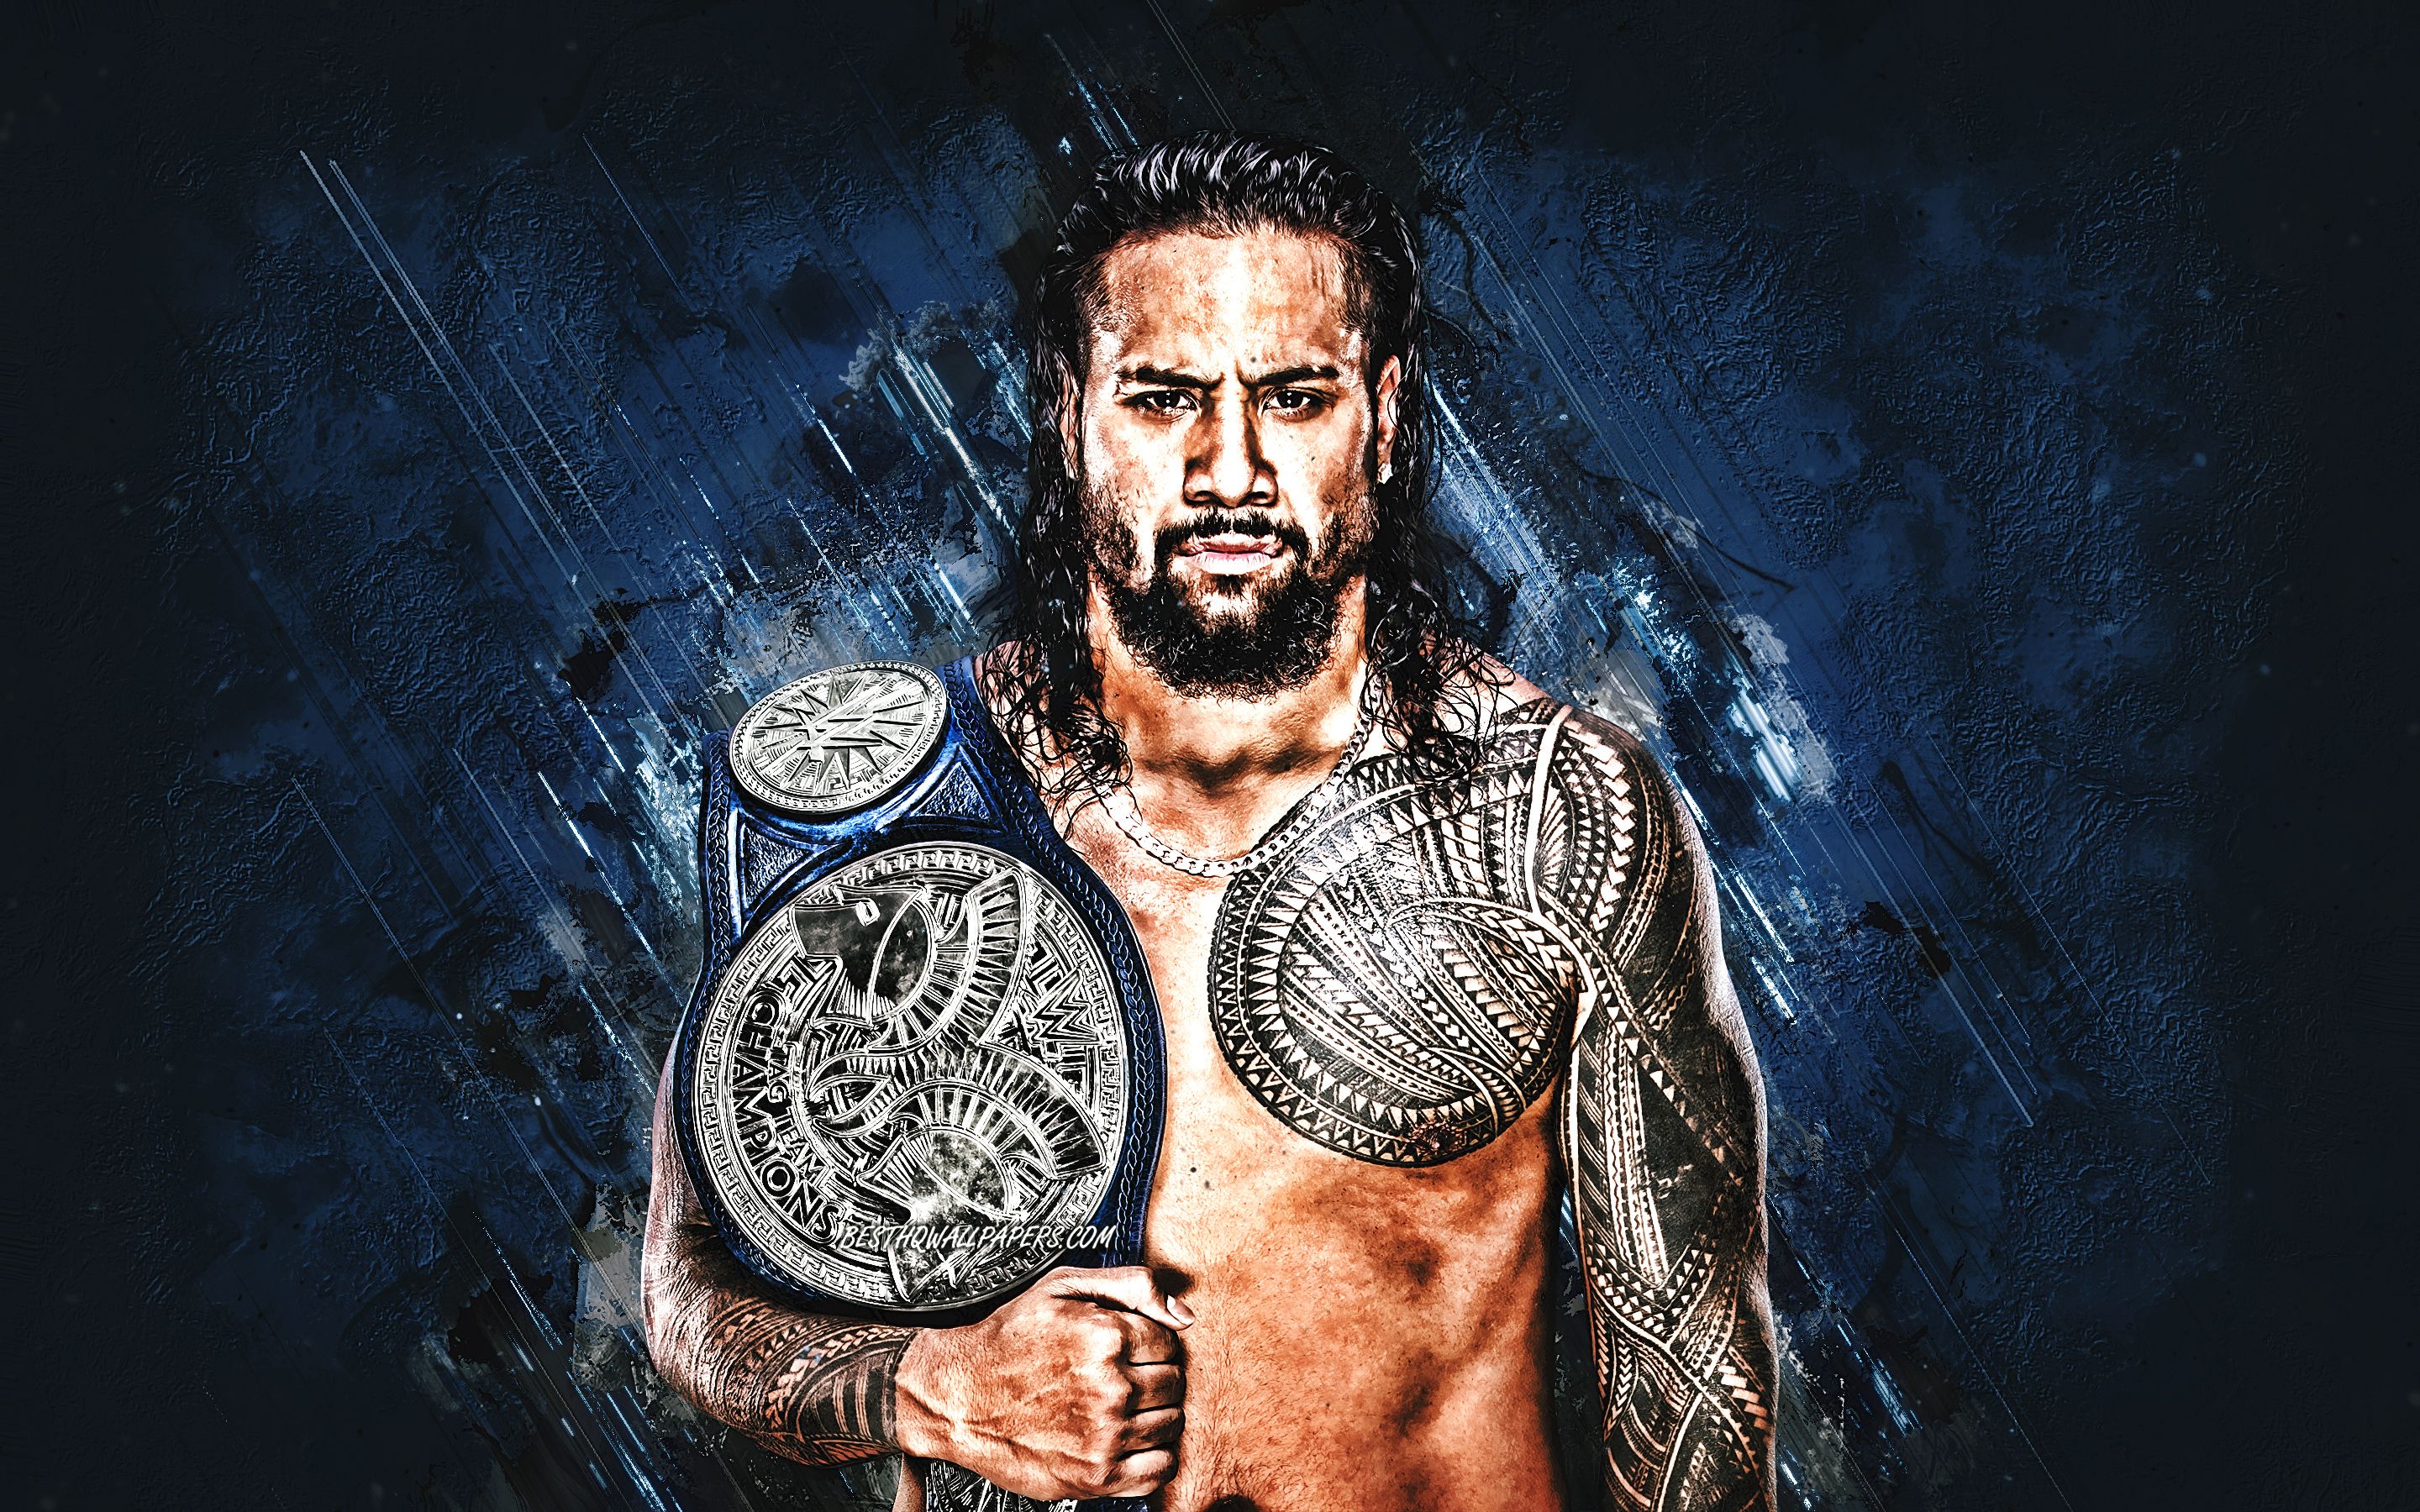 Download wallpaper Jimmy Uso, WWE, The Usos, Jonathan Solofa Fatu, portrait, blue stone background, USA for desktop with resolution 2880x1800. High Quality HD picture wallpaper